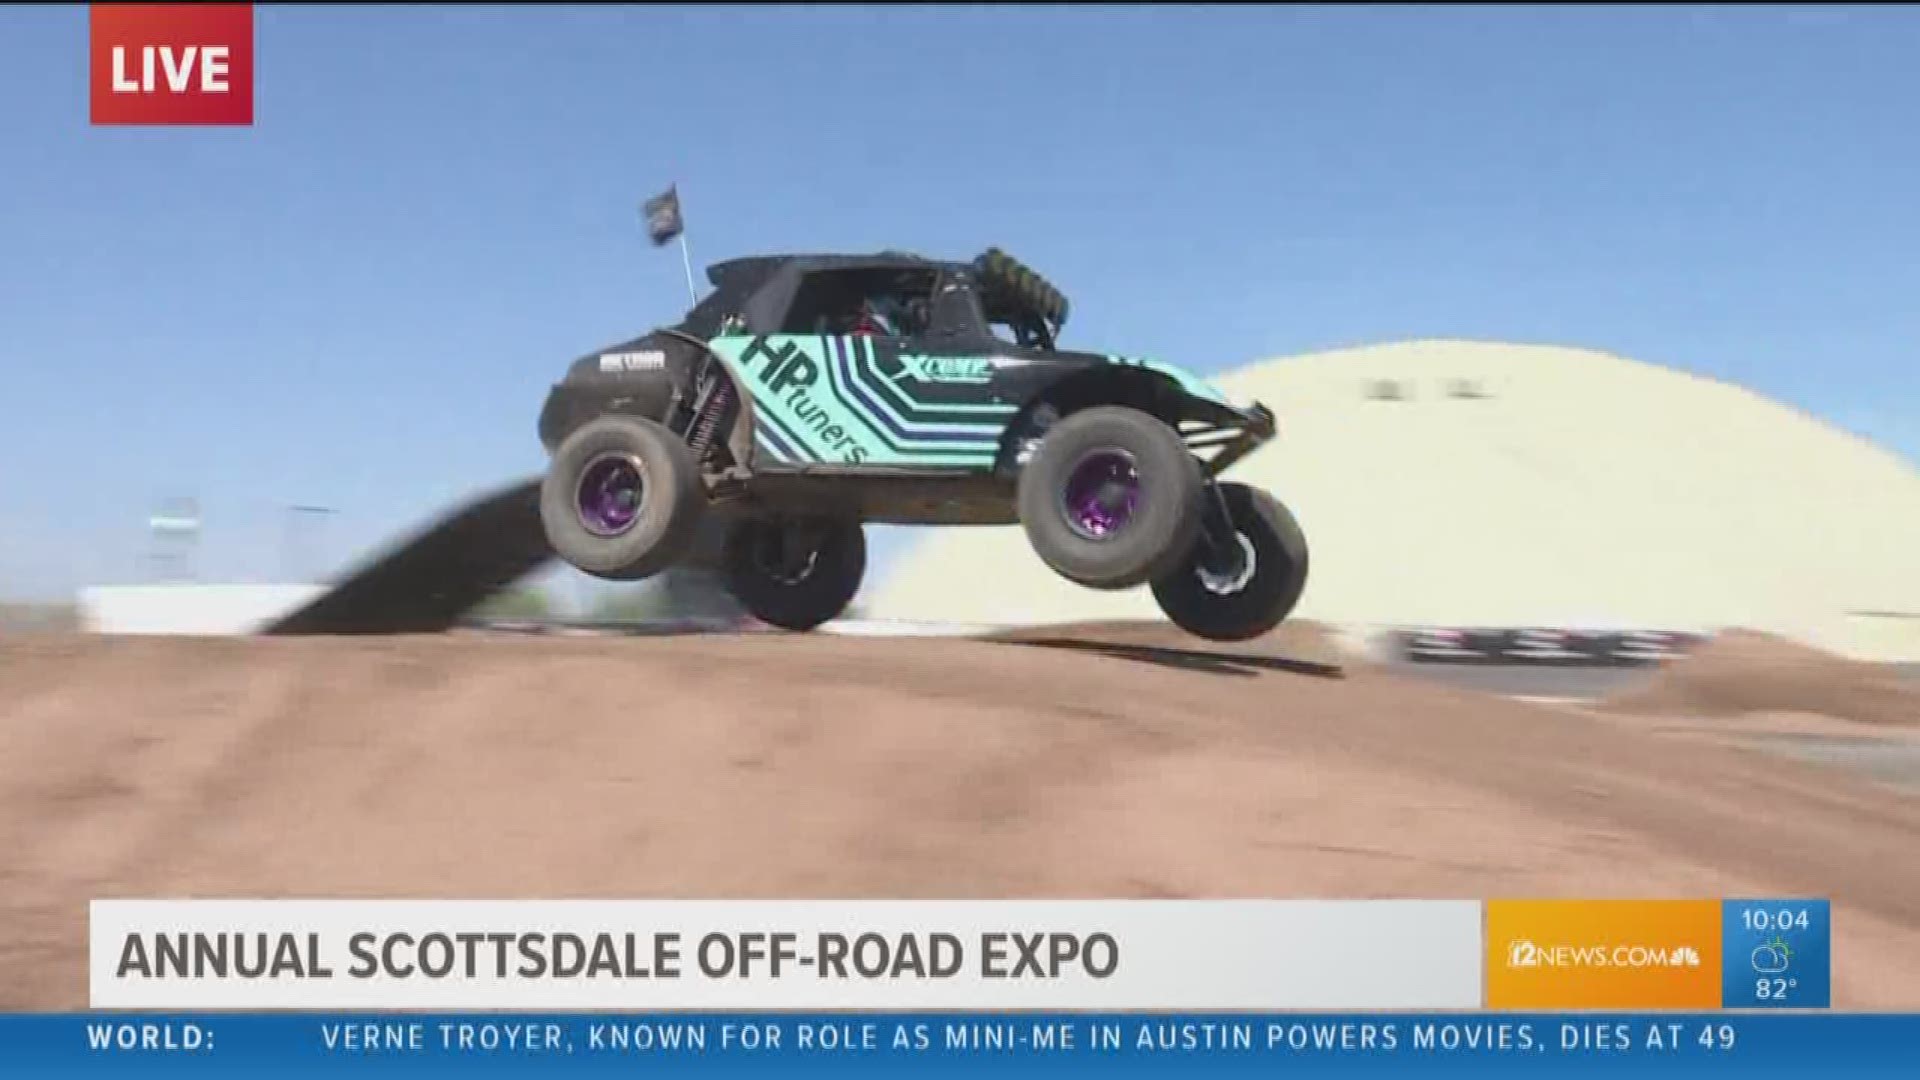 The Annual Scottsdale Off-road Expo is here and Monica Garcia had to experience it.